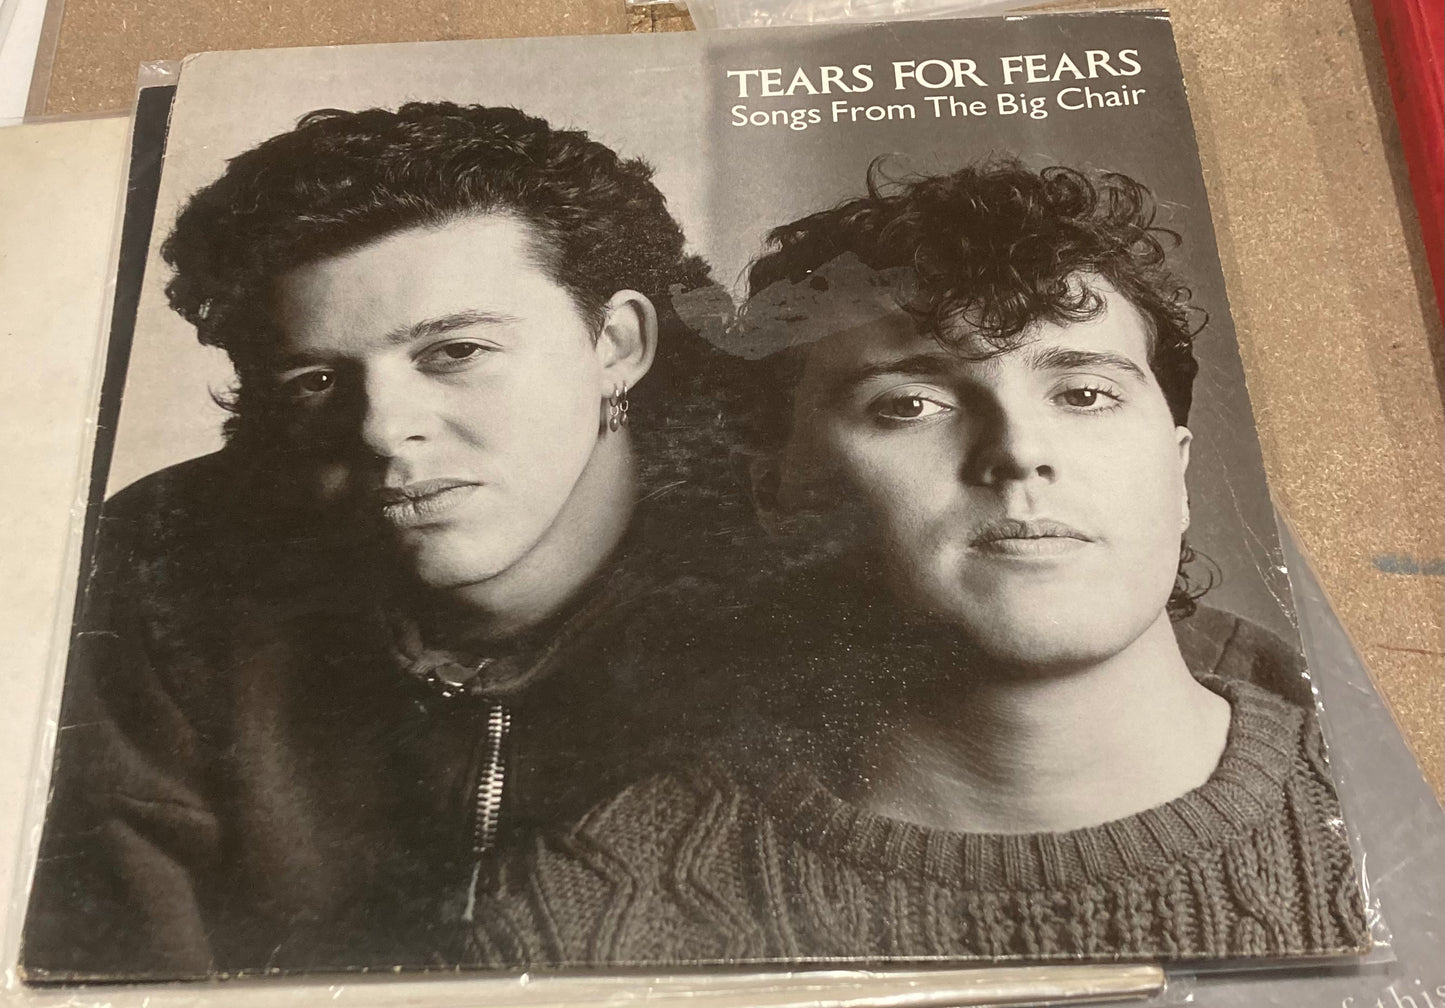 Tears for Fears - Songs From the Big Chair (Record LP Vinyl Album)